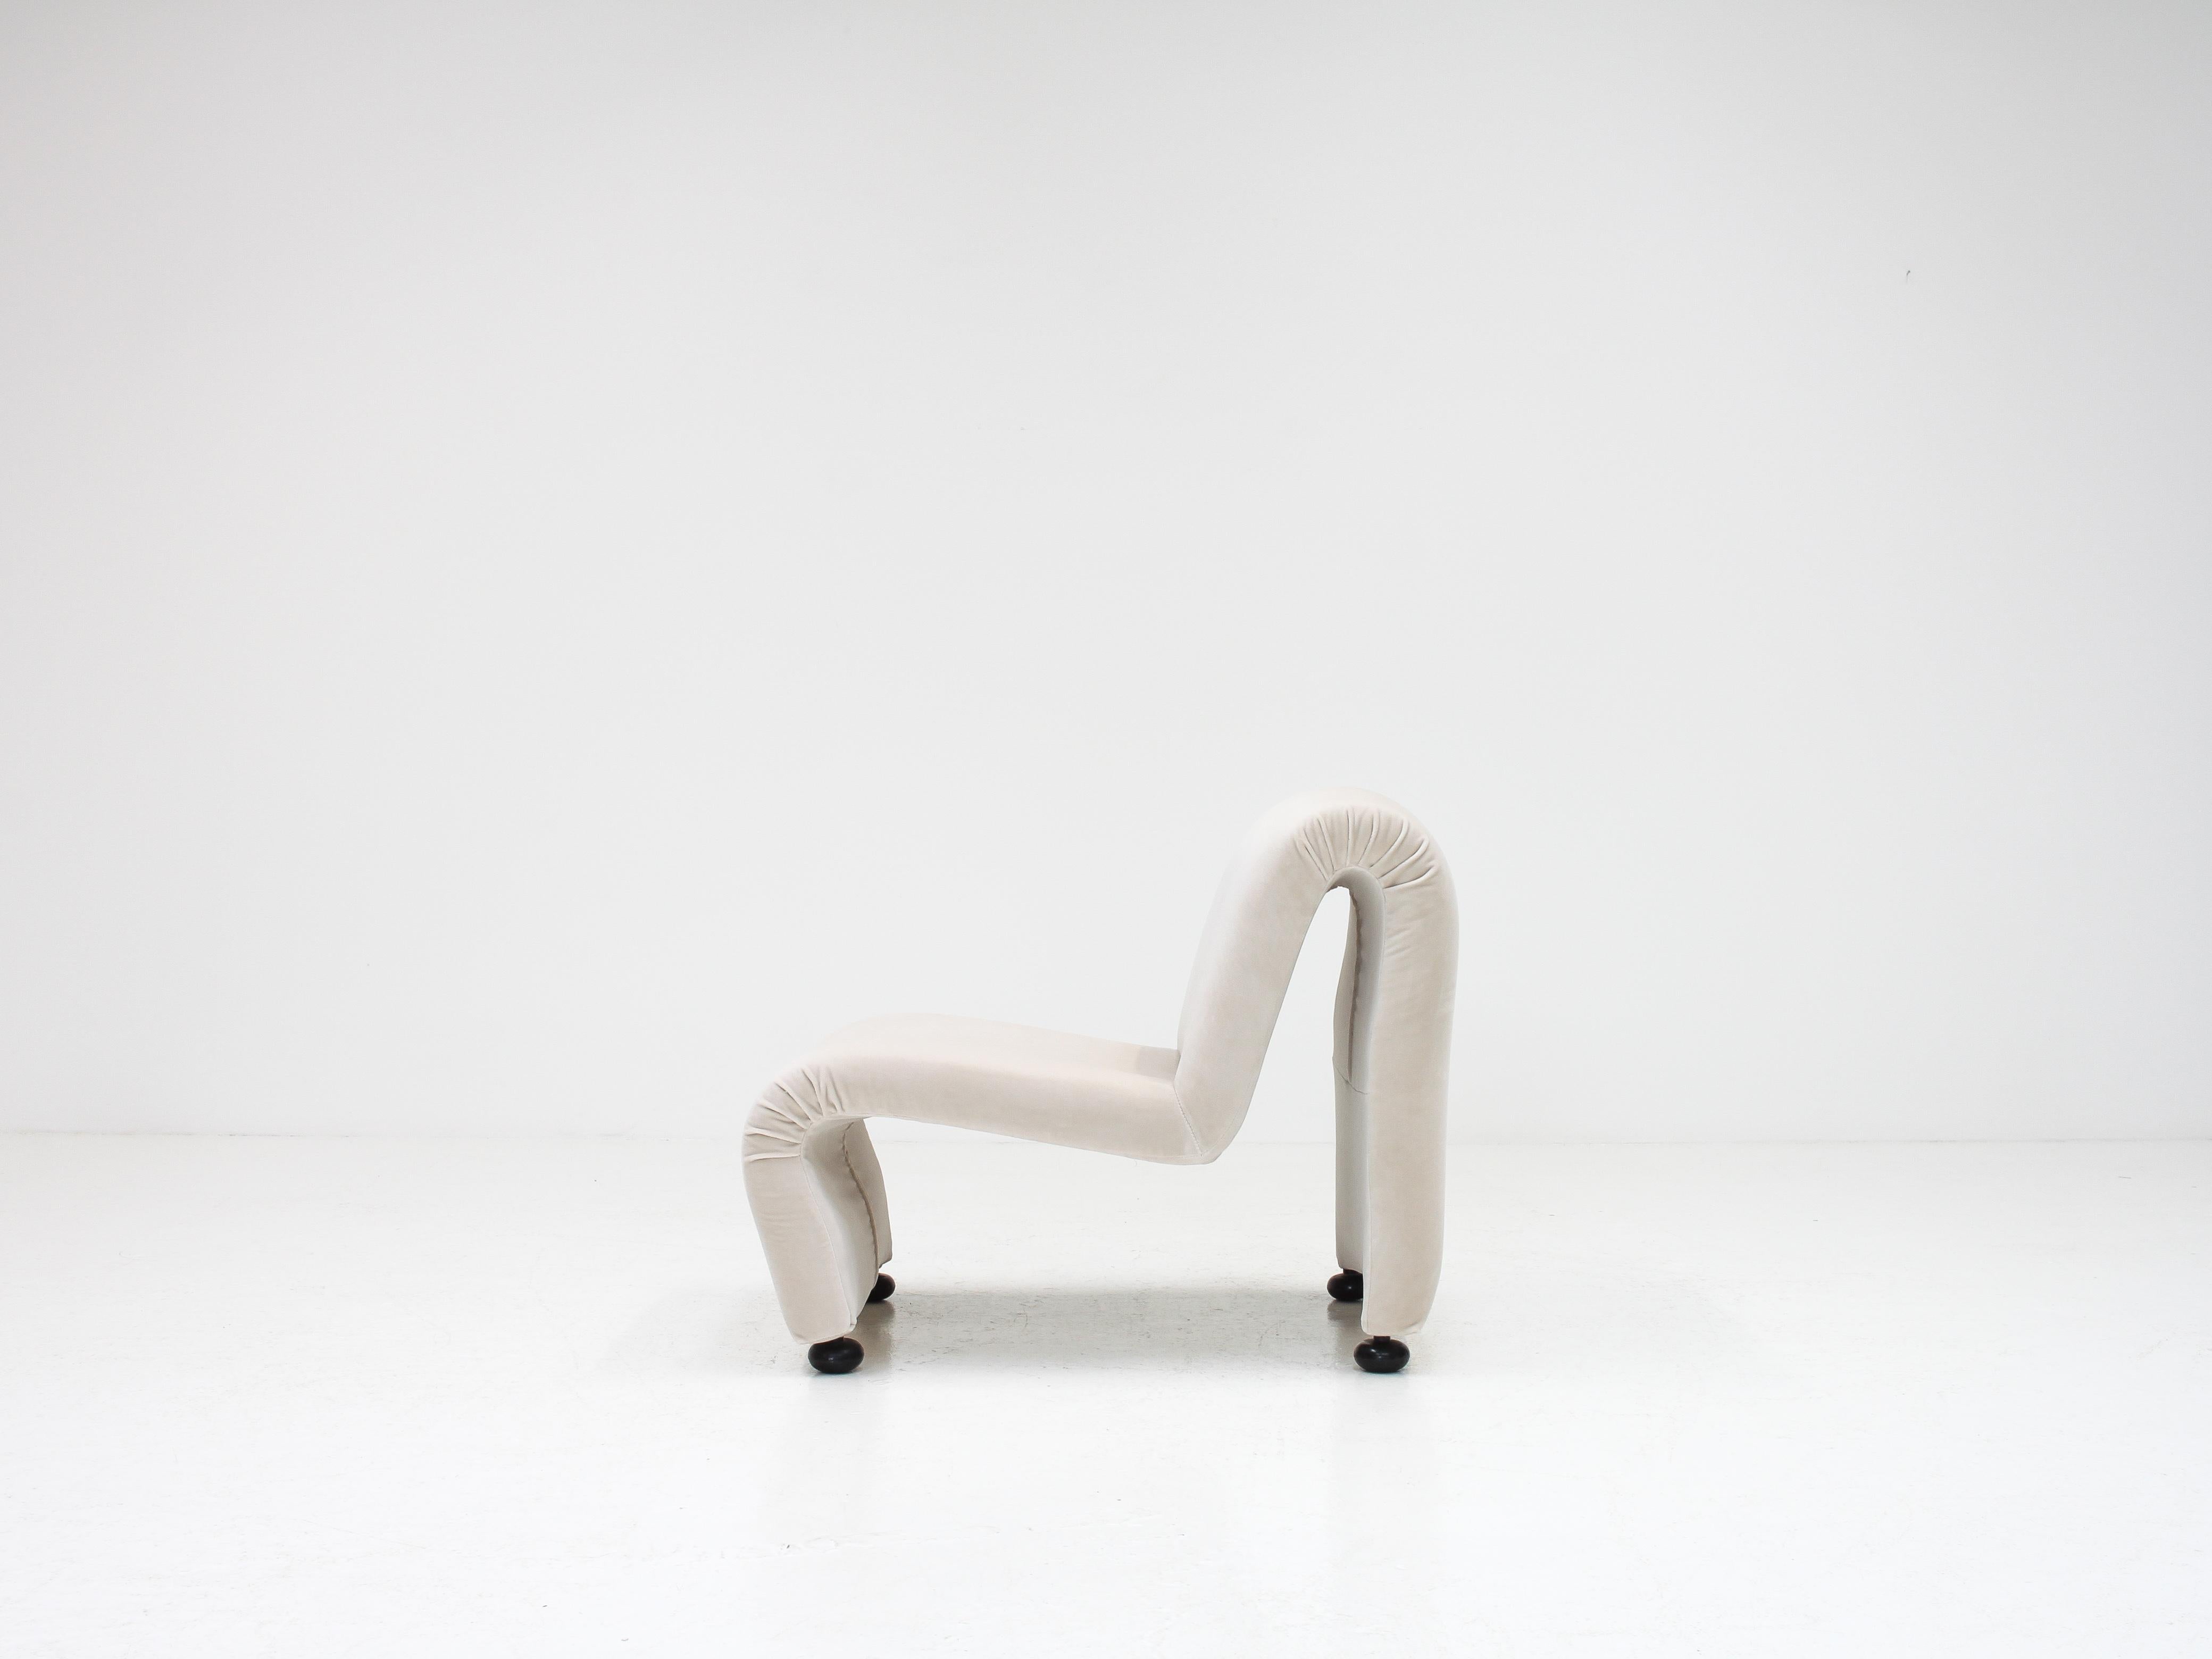 An Actual chair, Actual Edition, 1972, by Étienne Fermigier (attr).

An important figure in French design who was unfortunately killed in a car accident at only 41. Before his untimely death, he had opened his own studio in 1957, working both on